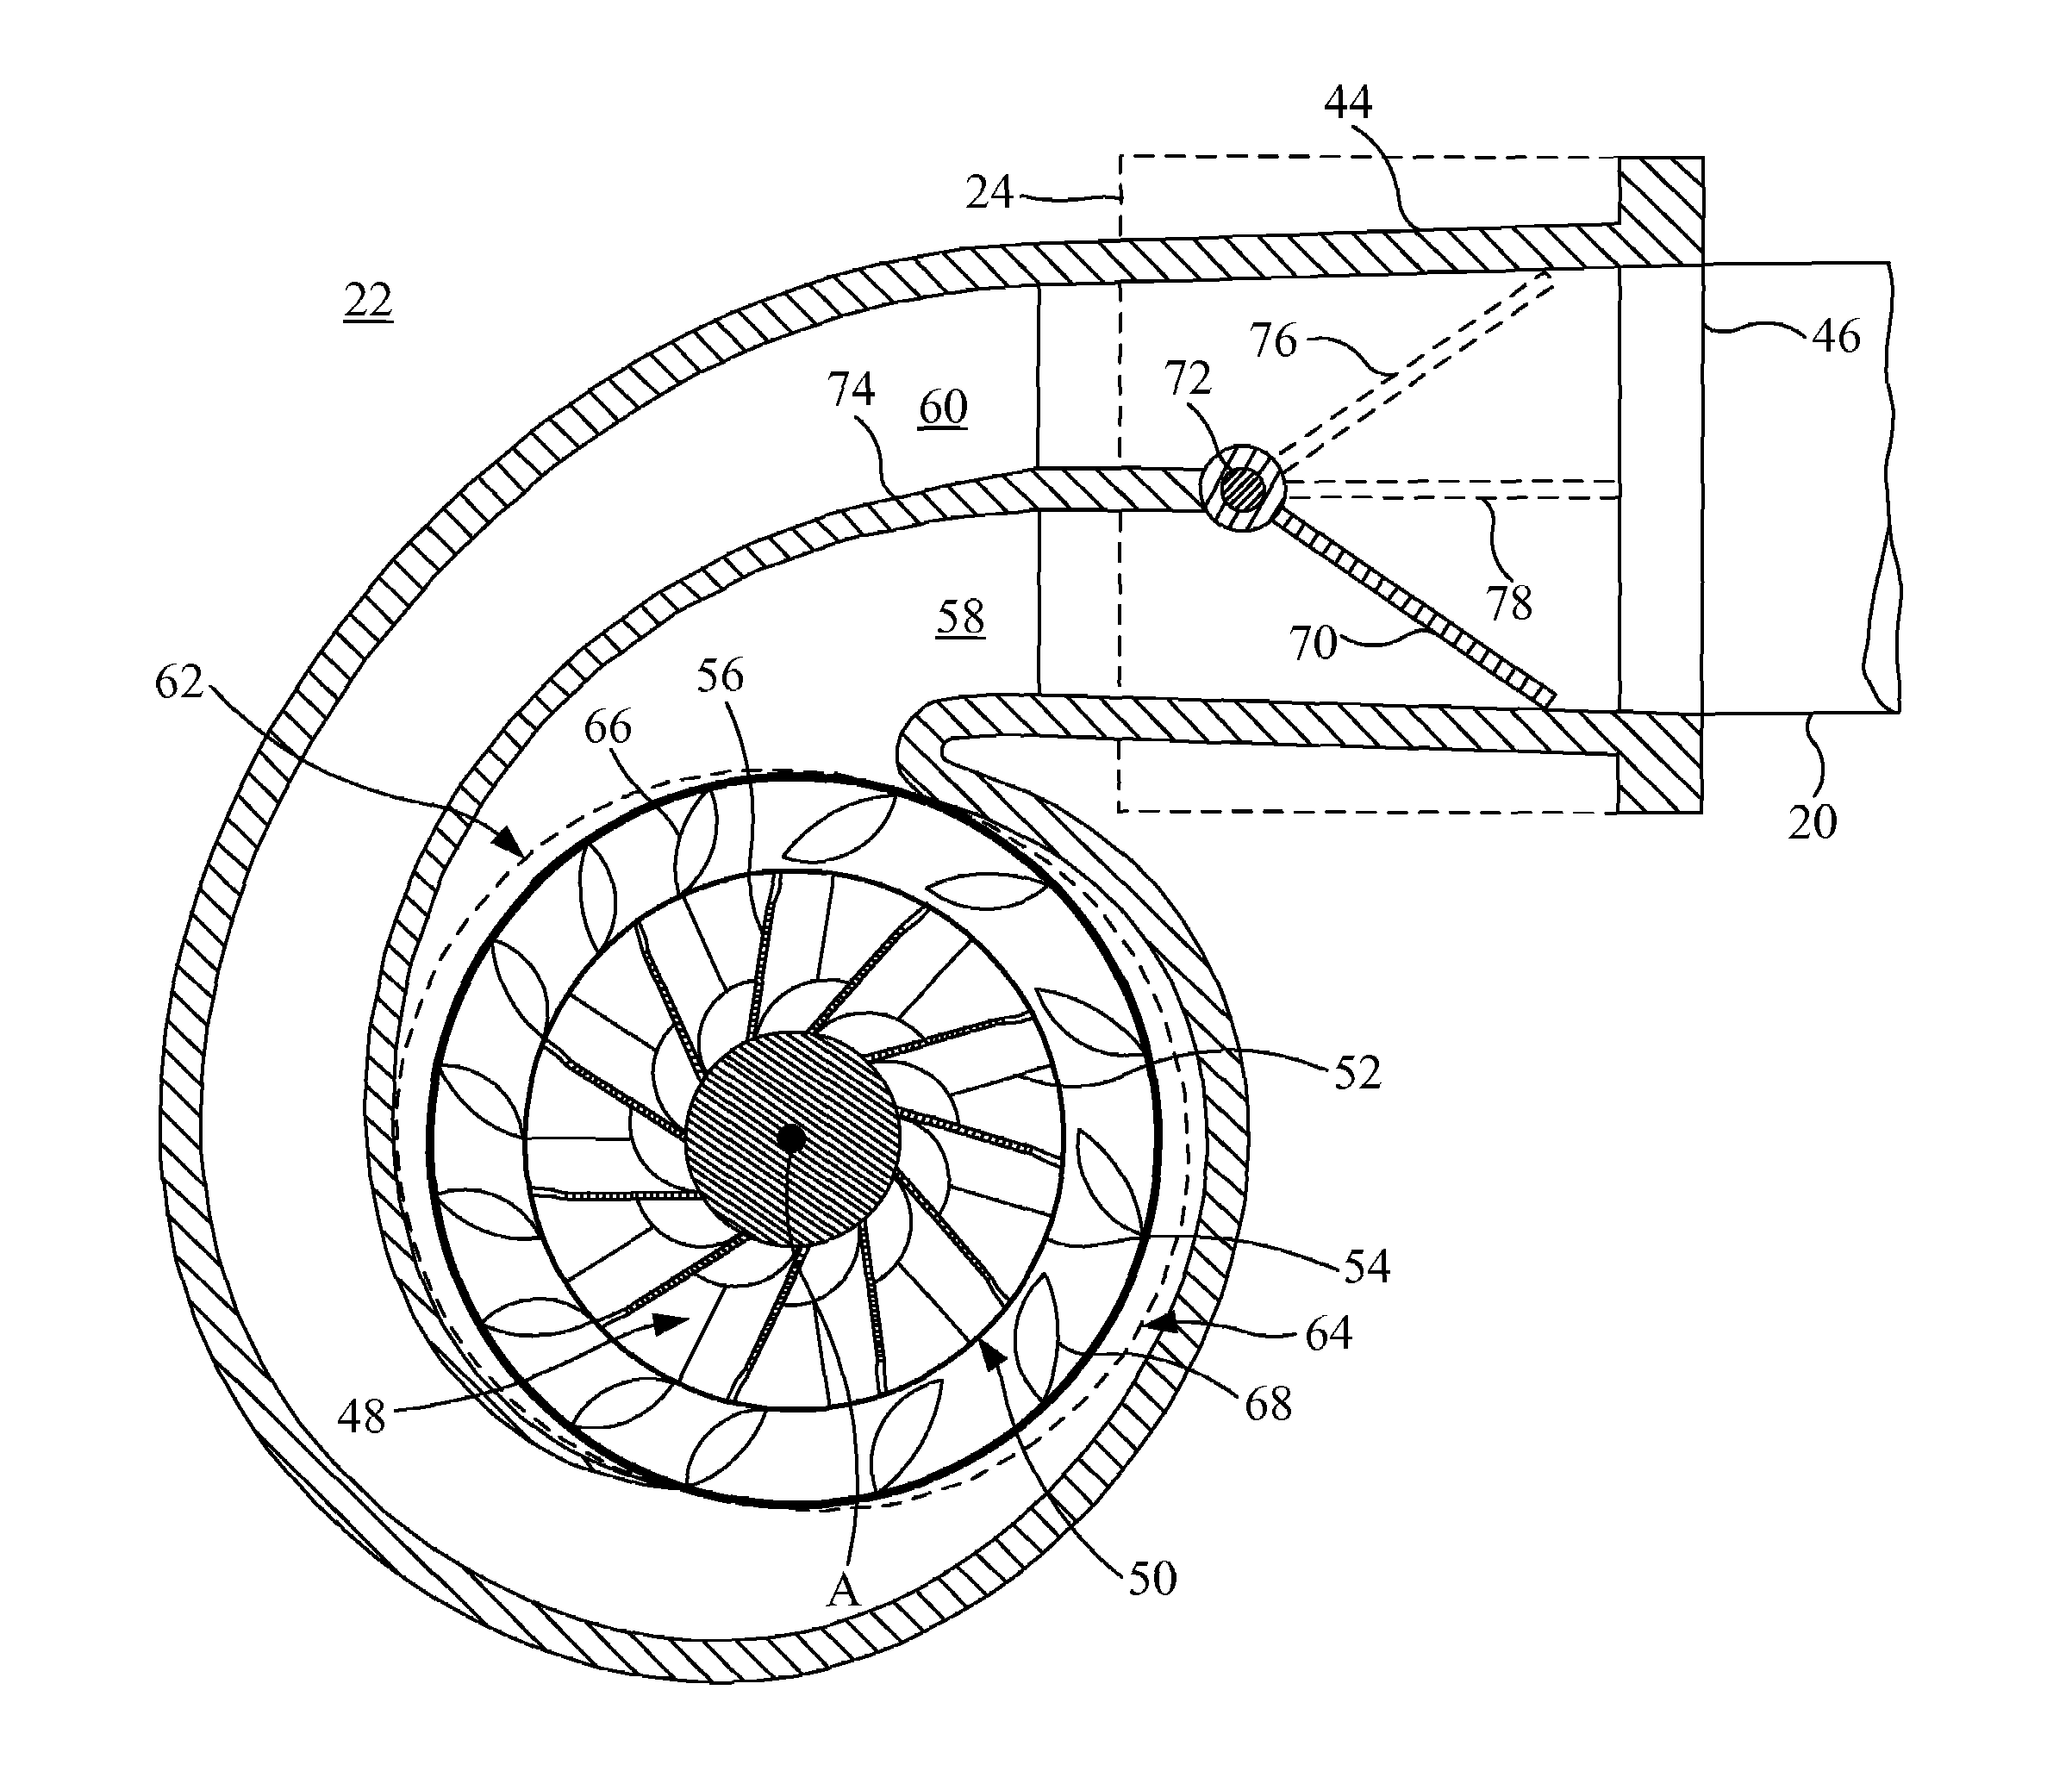 Internal combustion engine system having a power turbine with a broad efficiency range